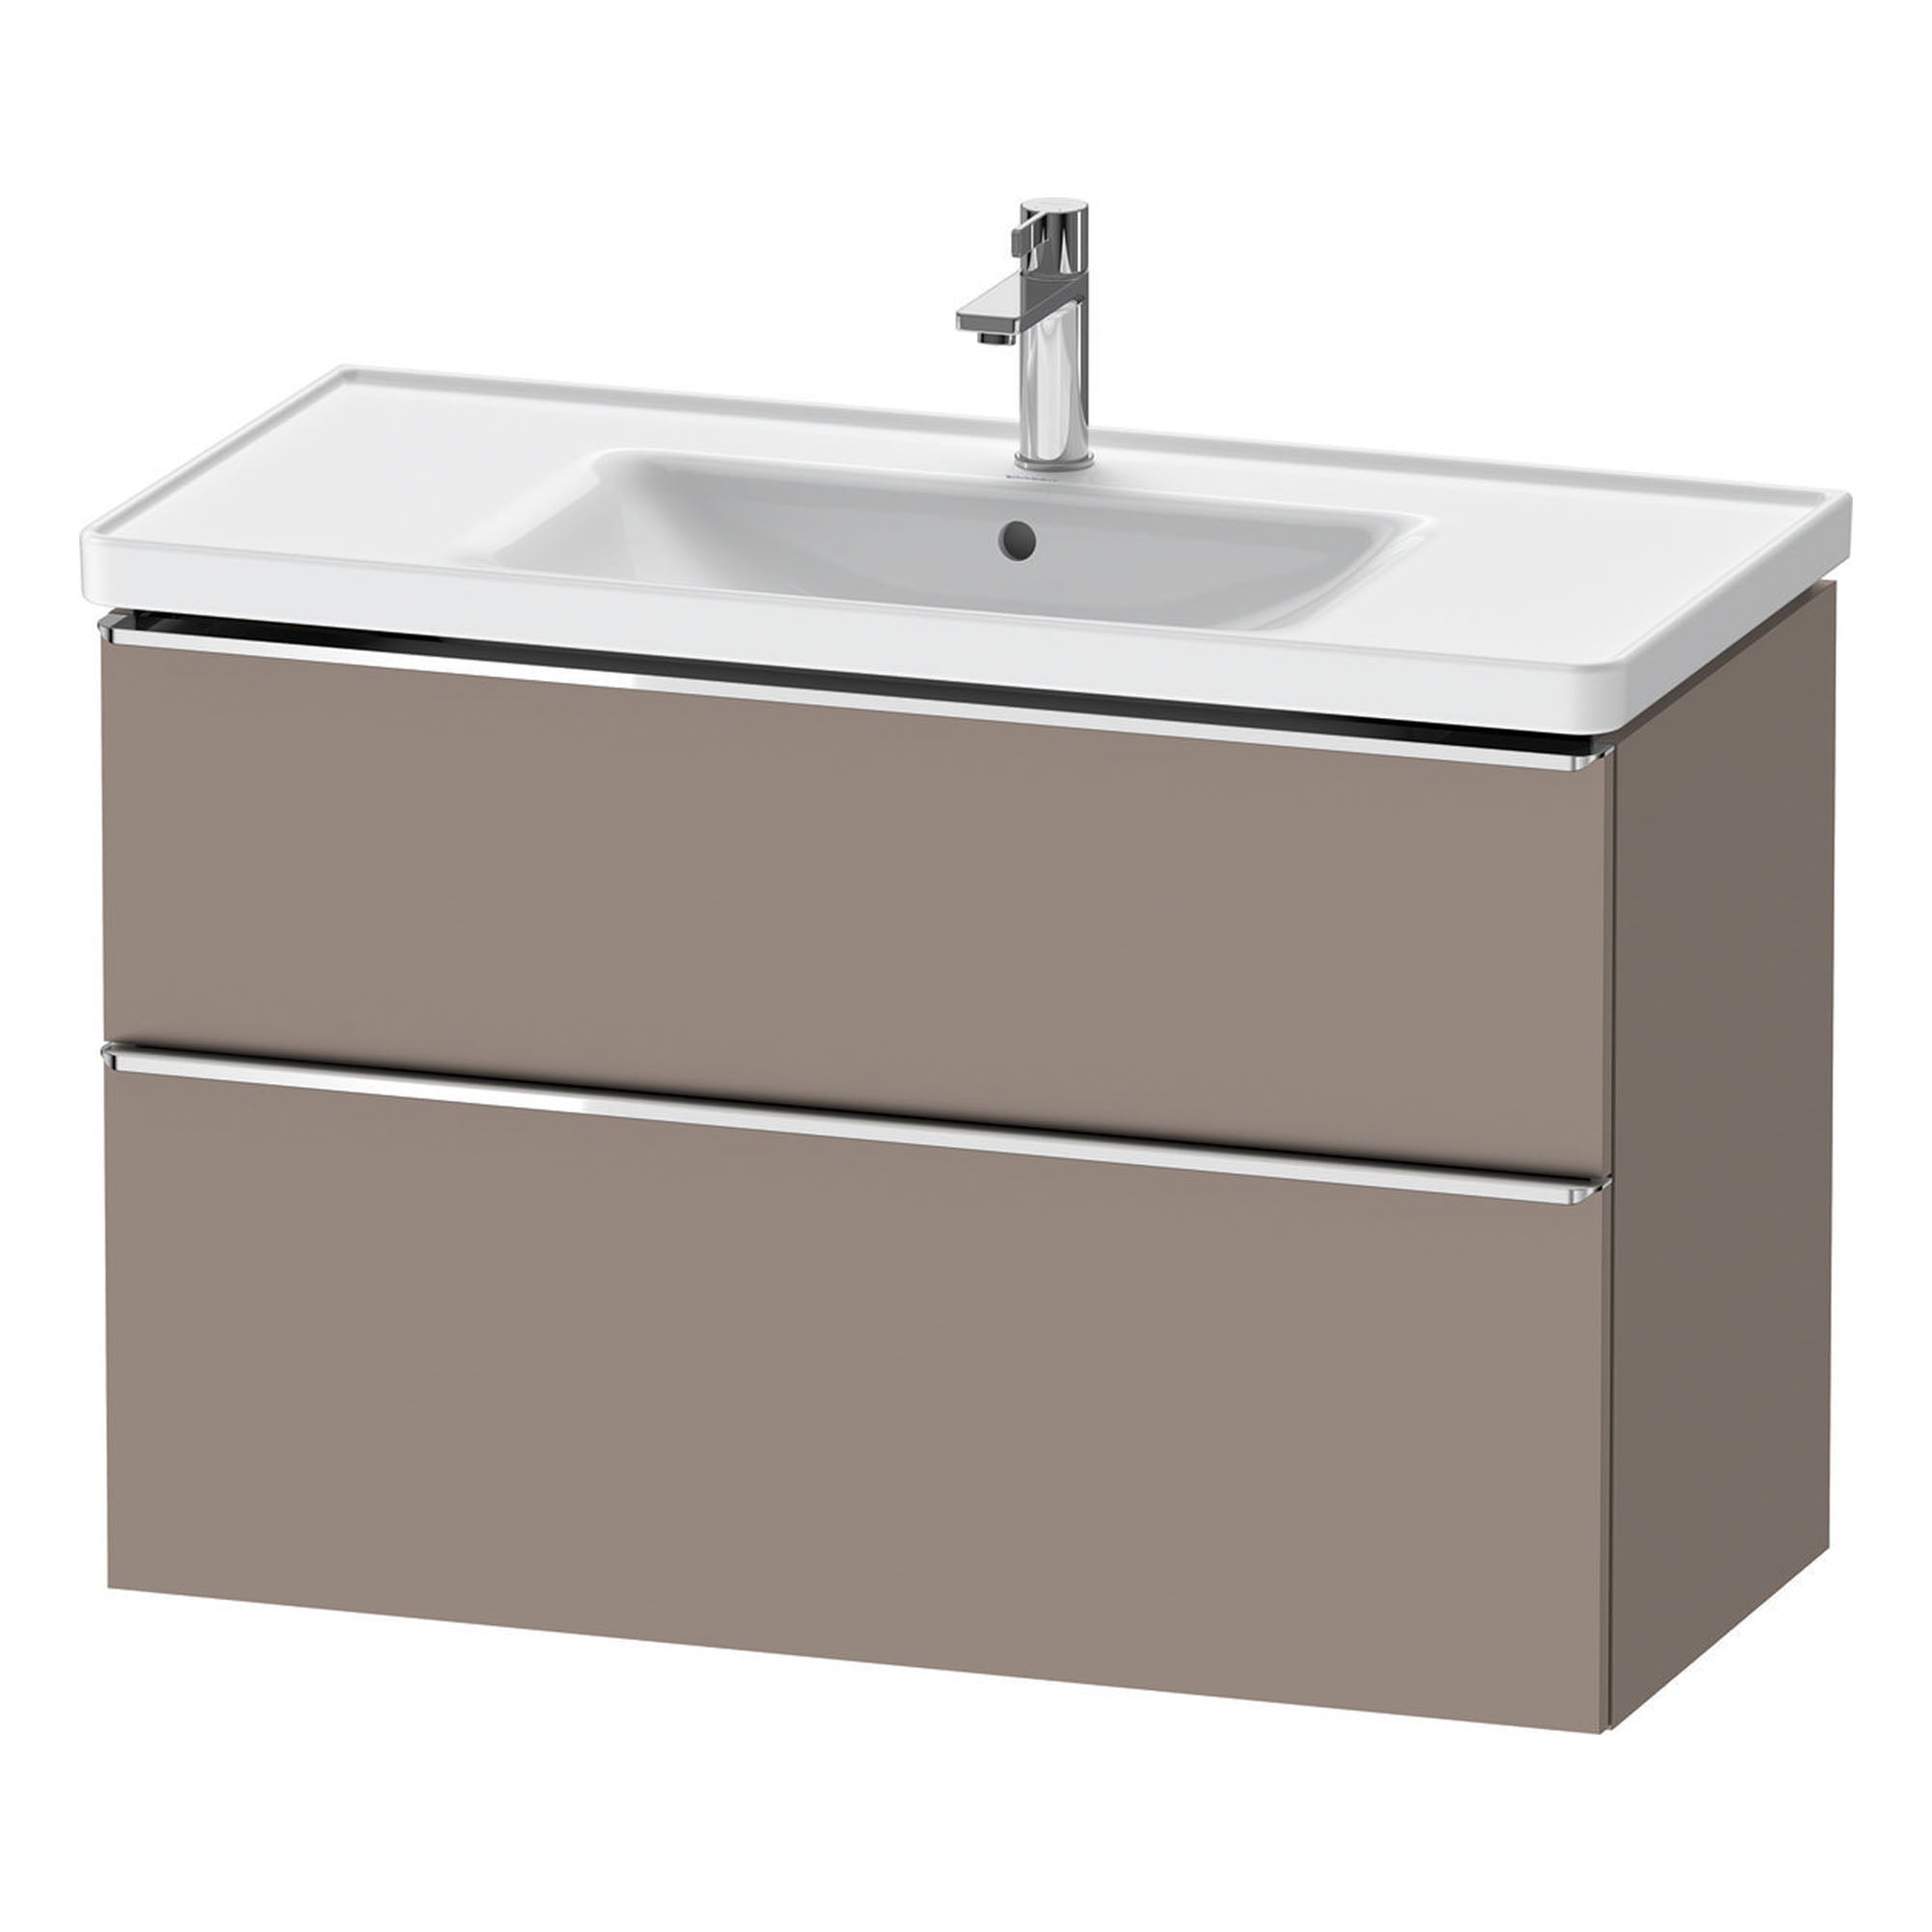 duravit d-neo 1000mm wall mounted vanity unit with d-neo basin basalt chrome handles